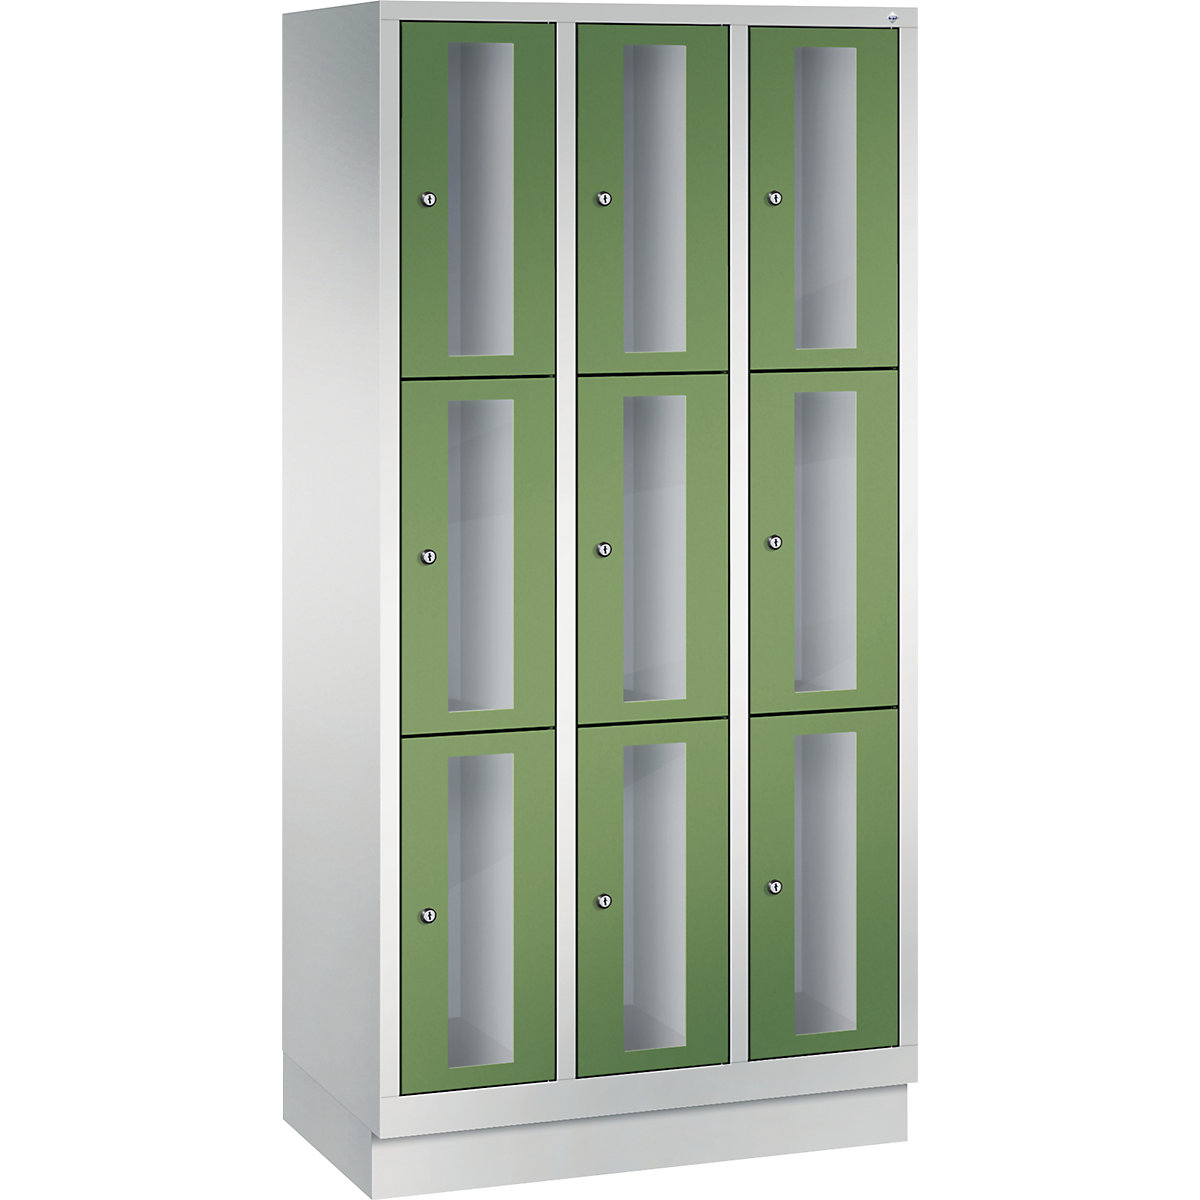 C+P – CLASSIC locker unit, compartment height 510 mm, with plinth, 9 compartments, width 900 mm, reseda green door